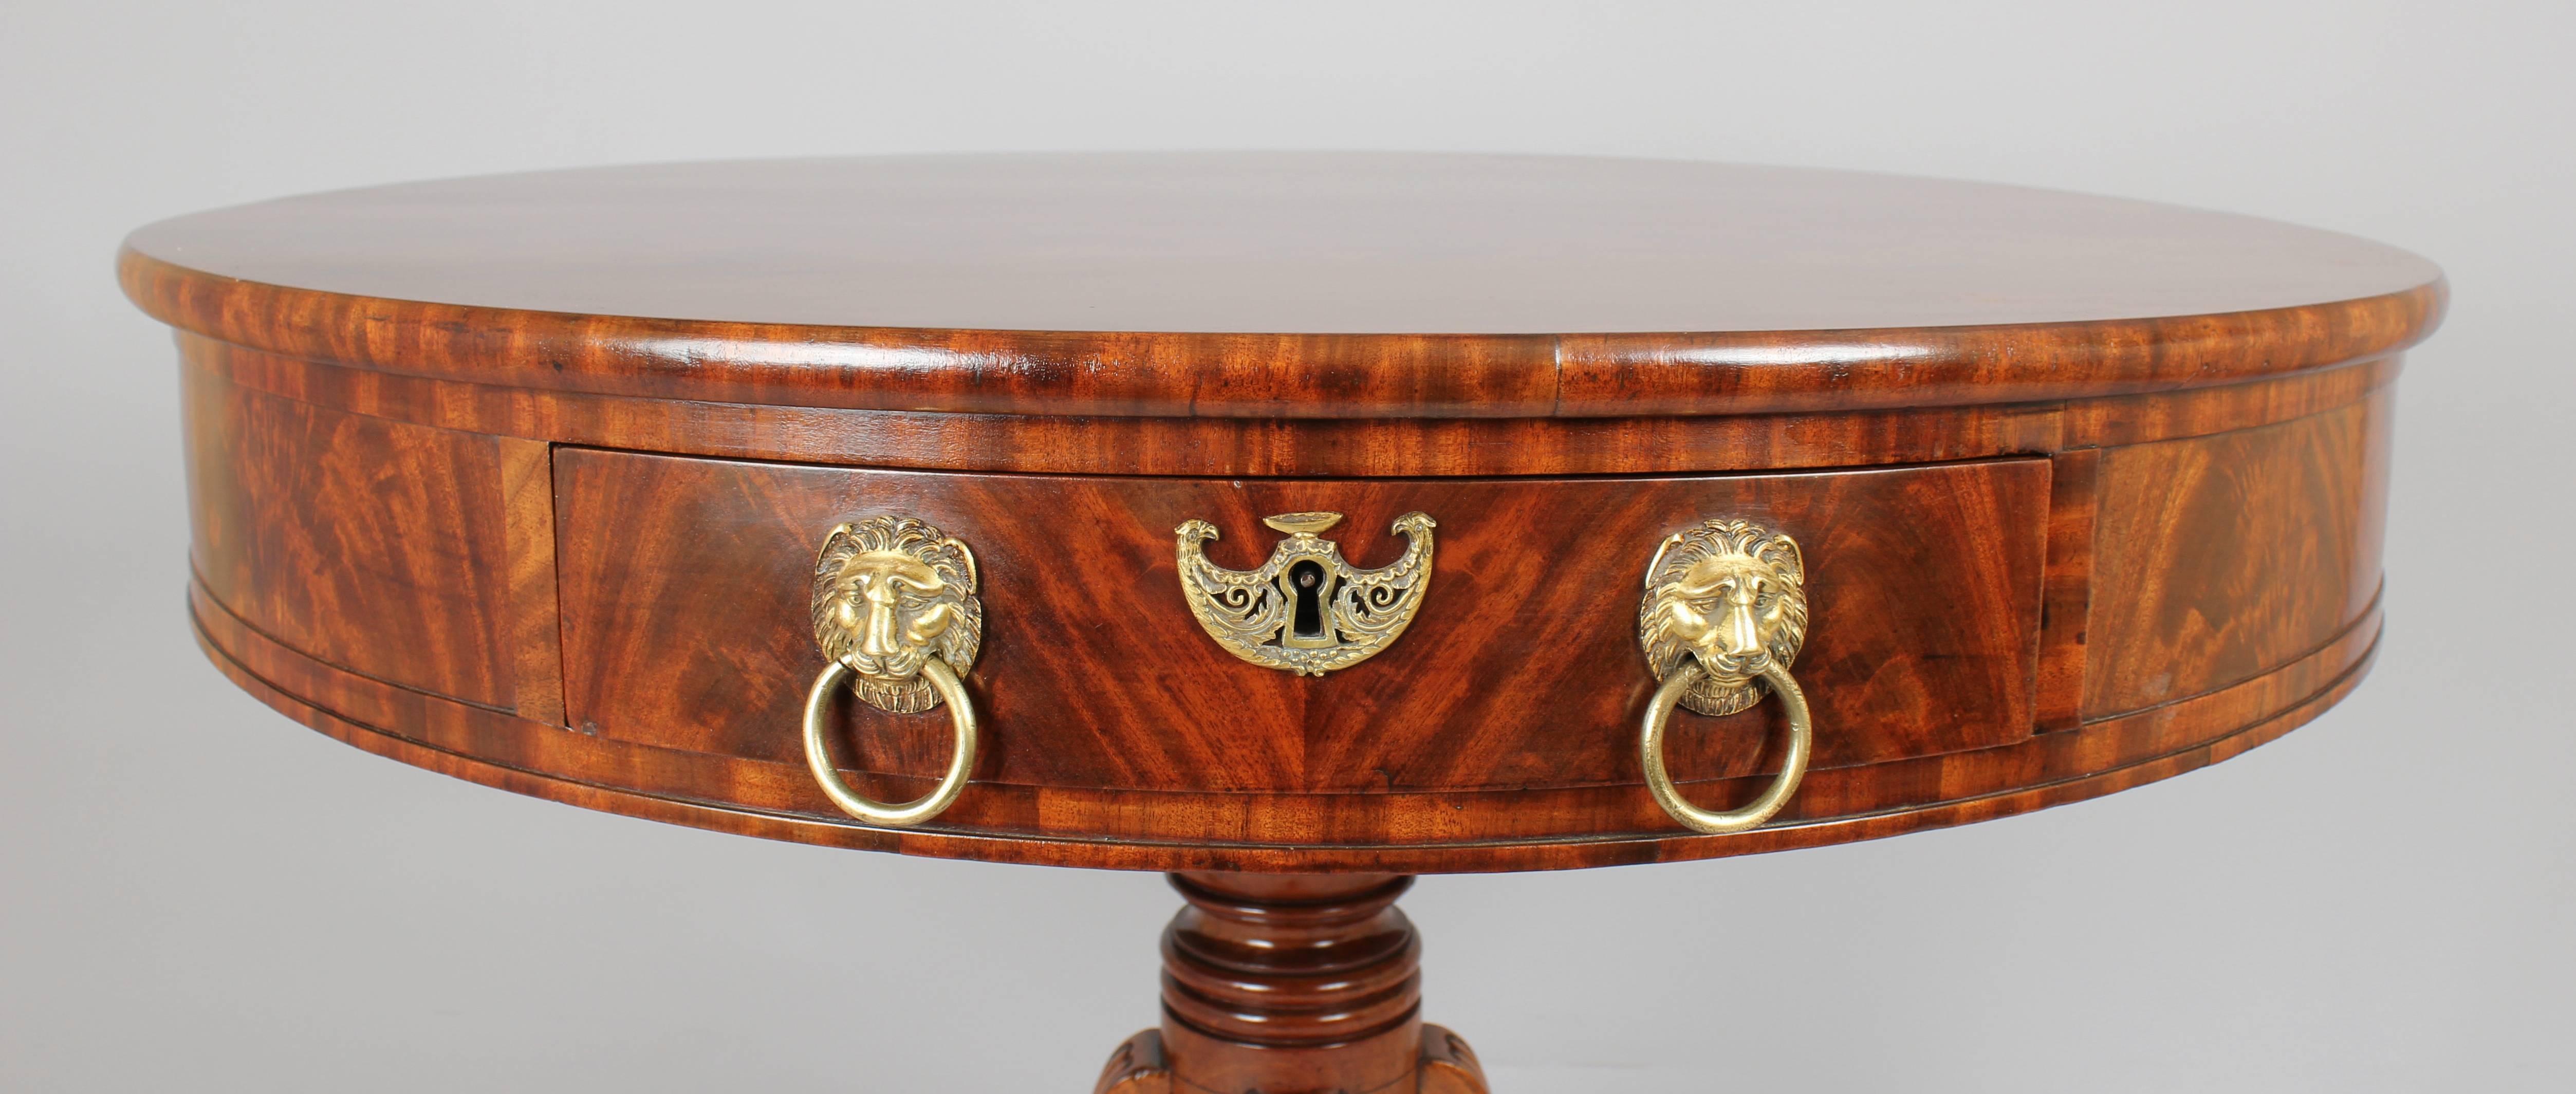 Fine quality early 19th century Continental mahogany small drum-table with richly-figured and matched flame veneers throughout; the two drawers with original cast-brass lion's-mask handles and pelta-shaped escutcheons, one fitted with a hinged